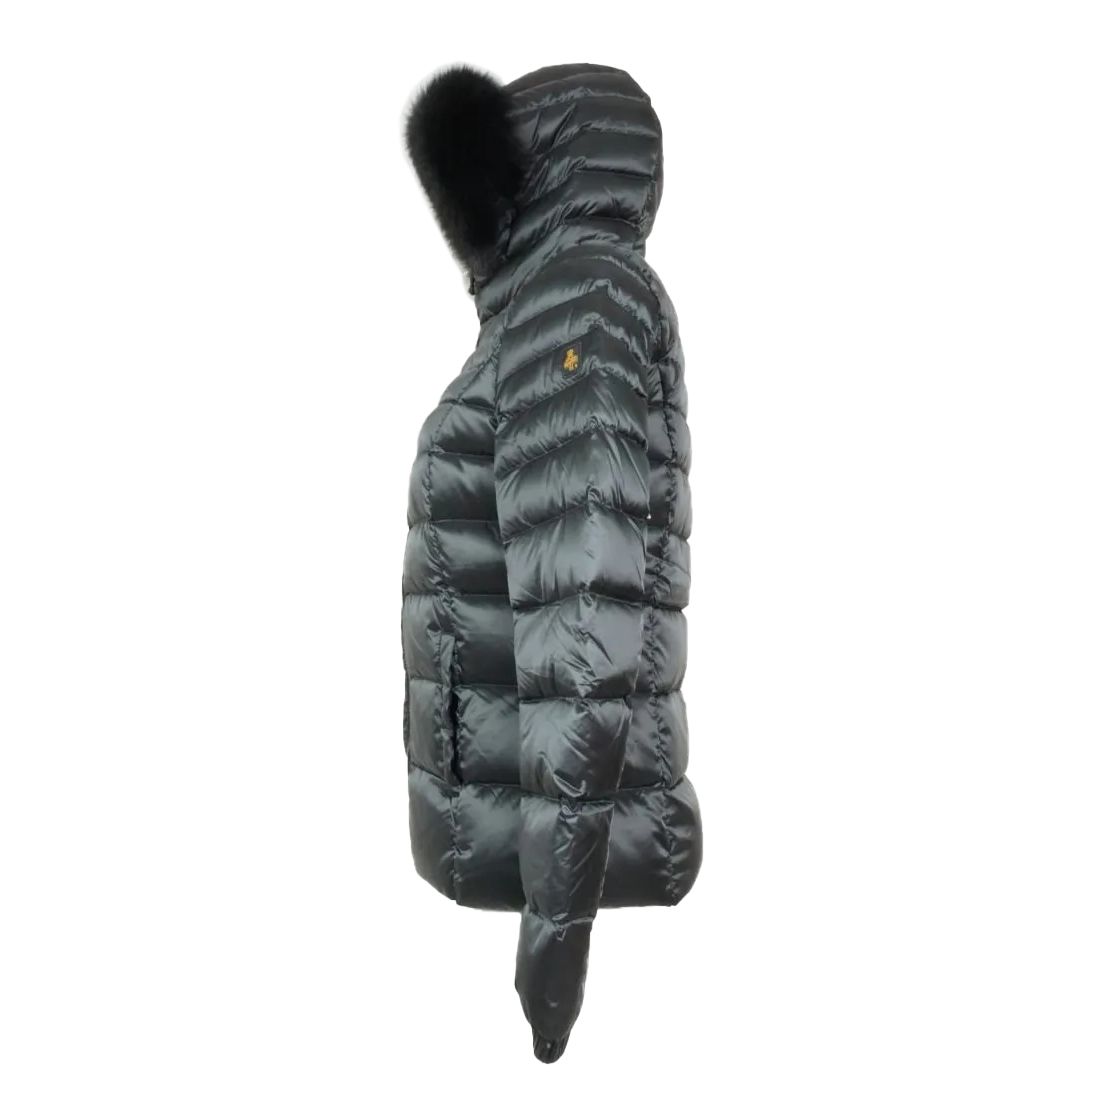 Chic Padded Down Jacket with Fur Hood